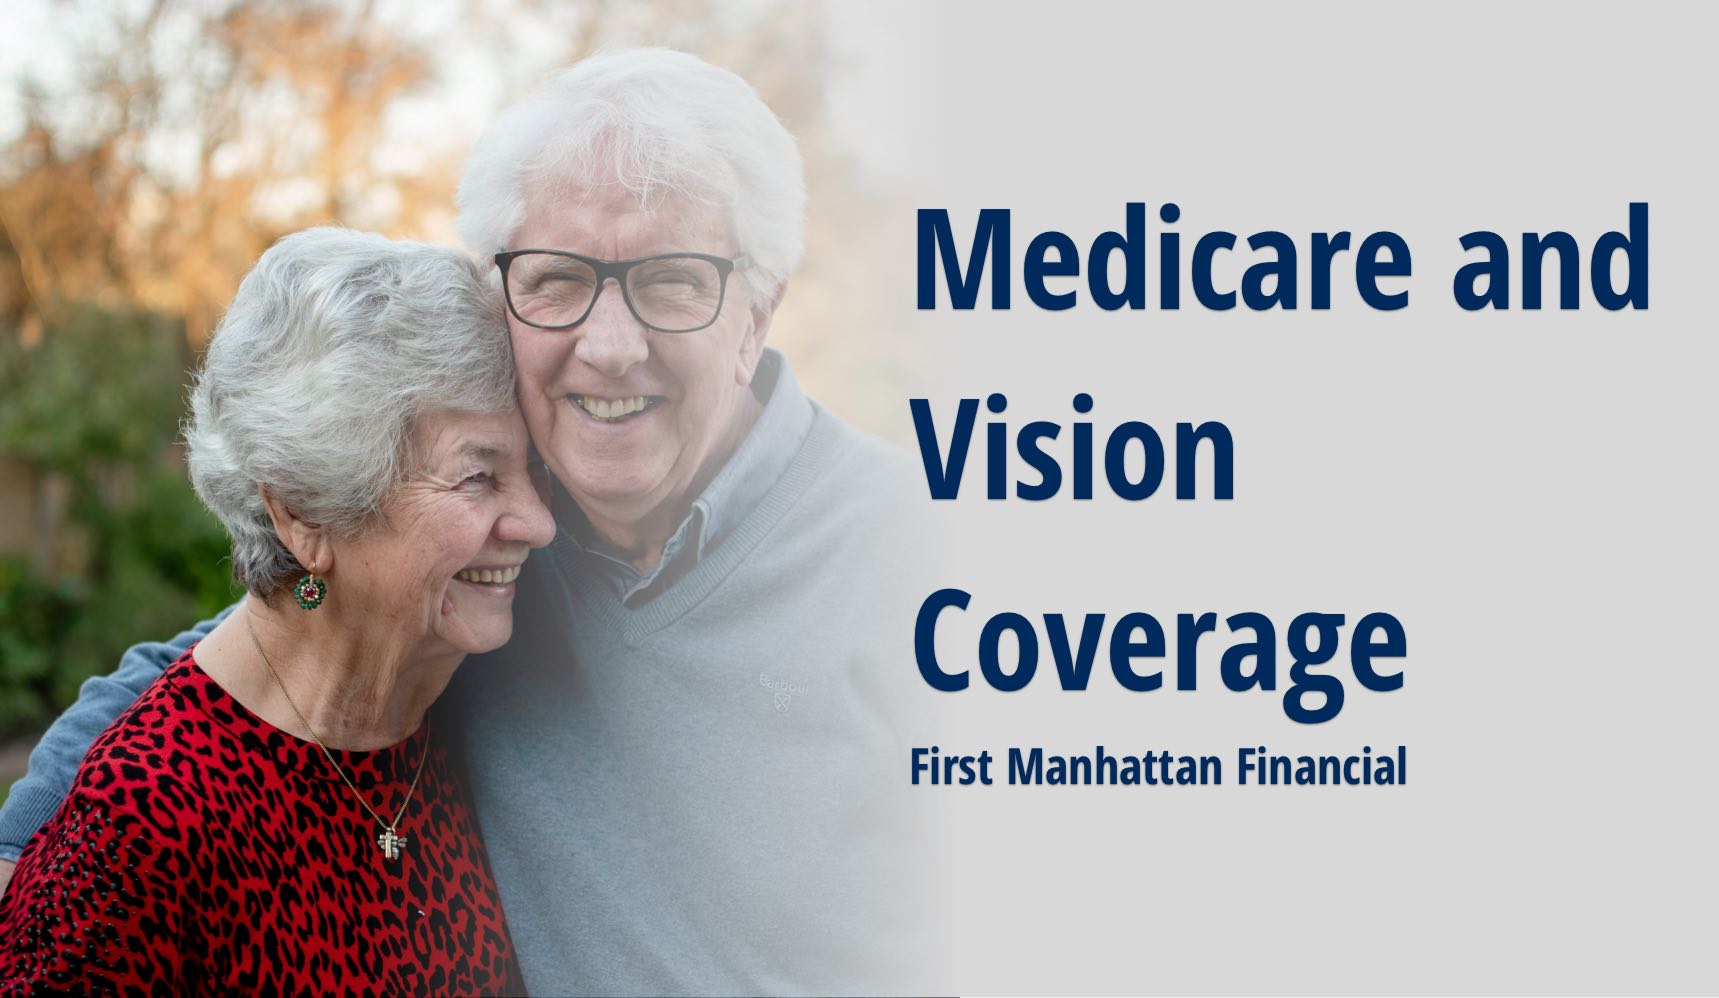 Medicare and Vision Coverage | First Manhattan Financial